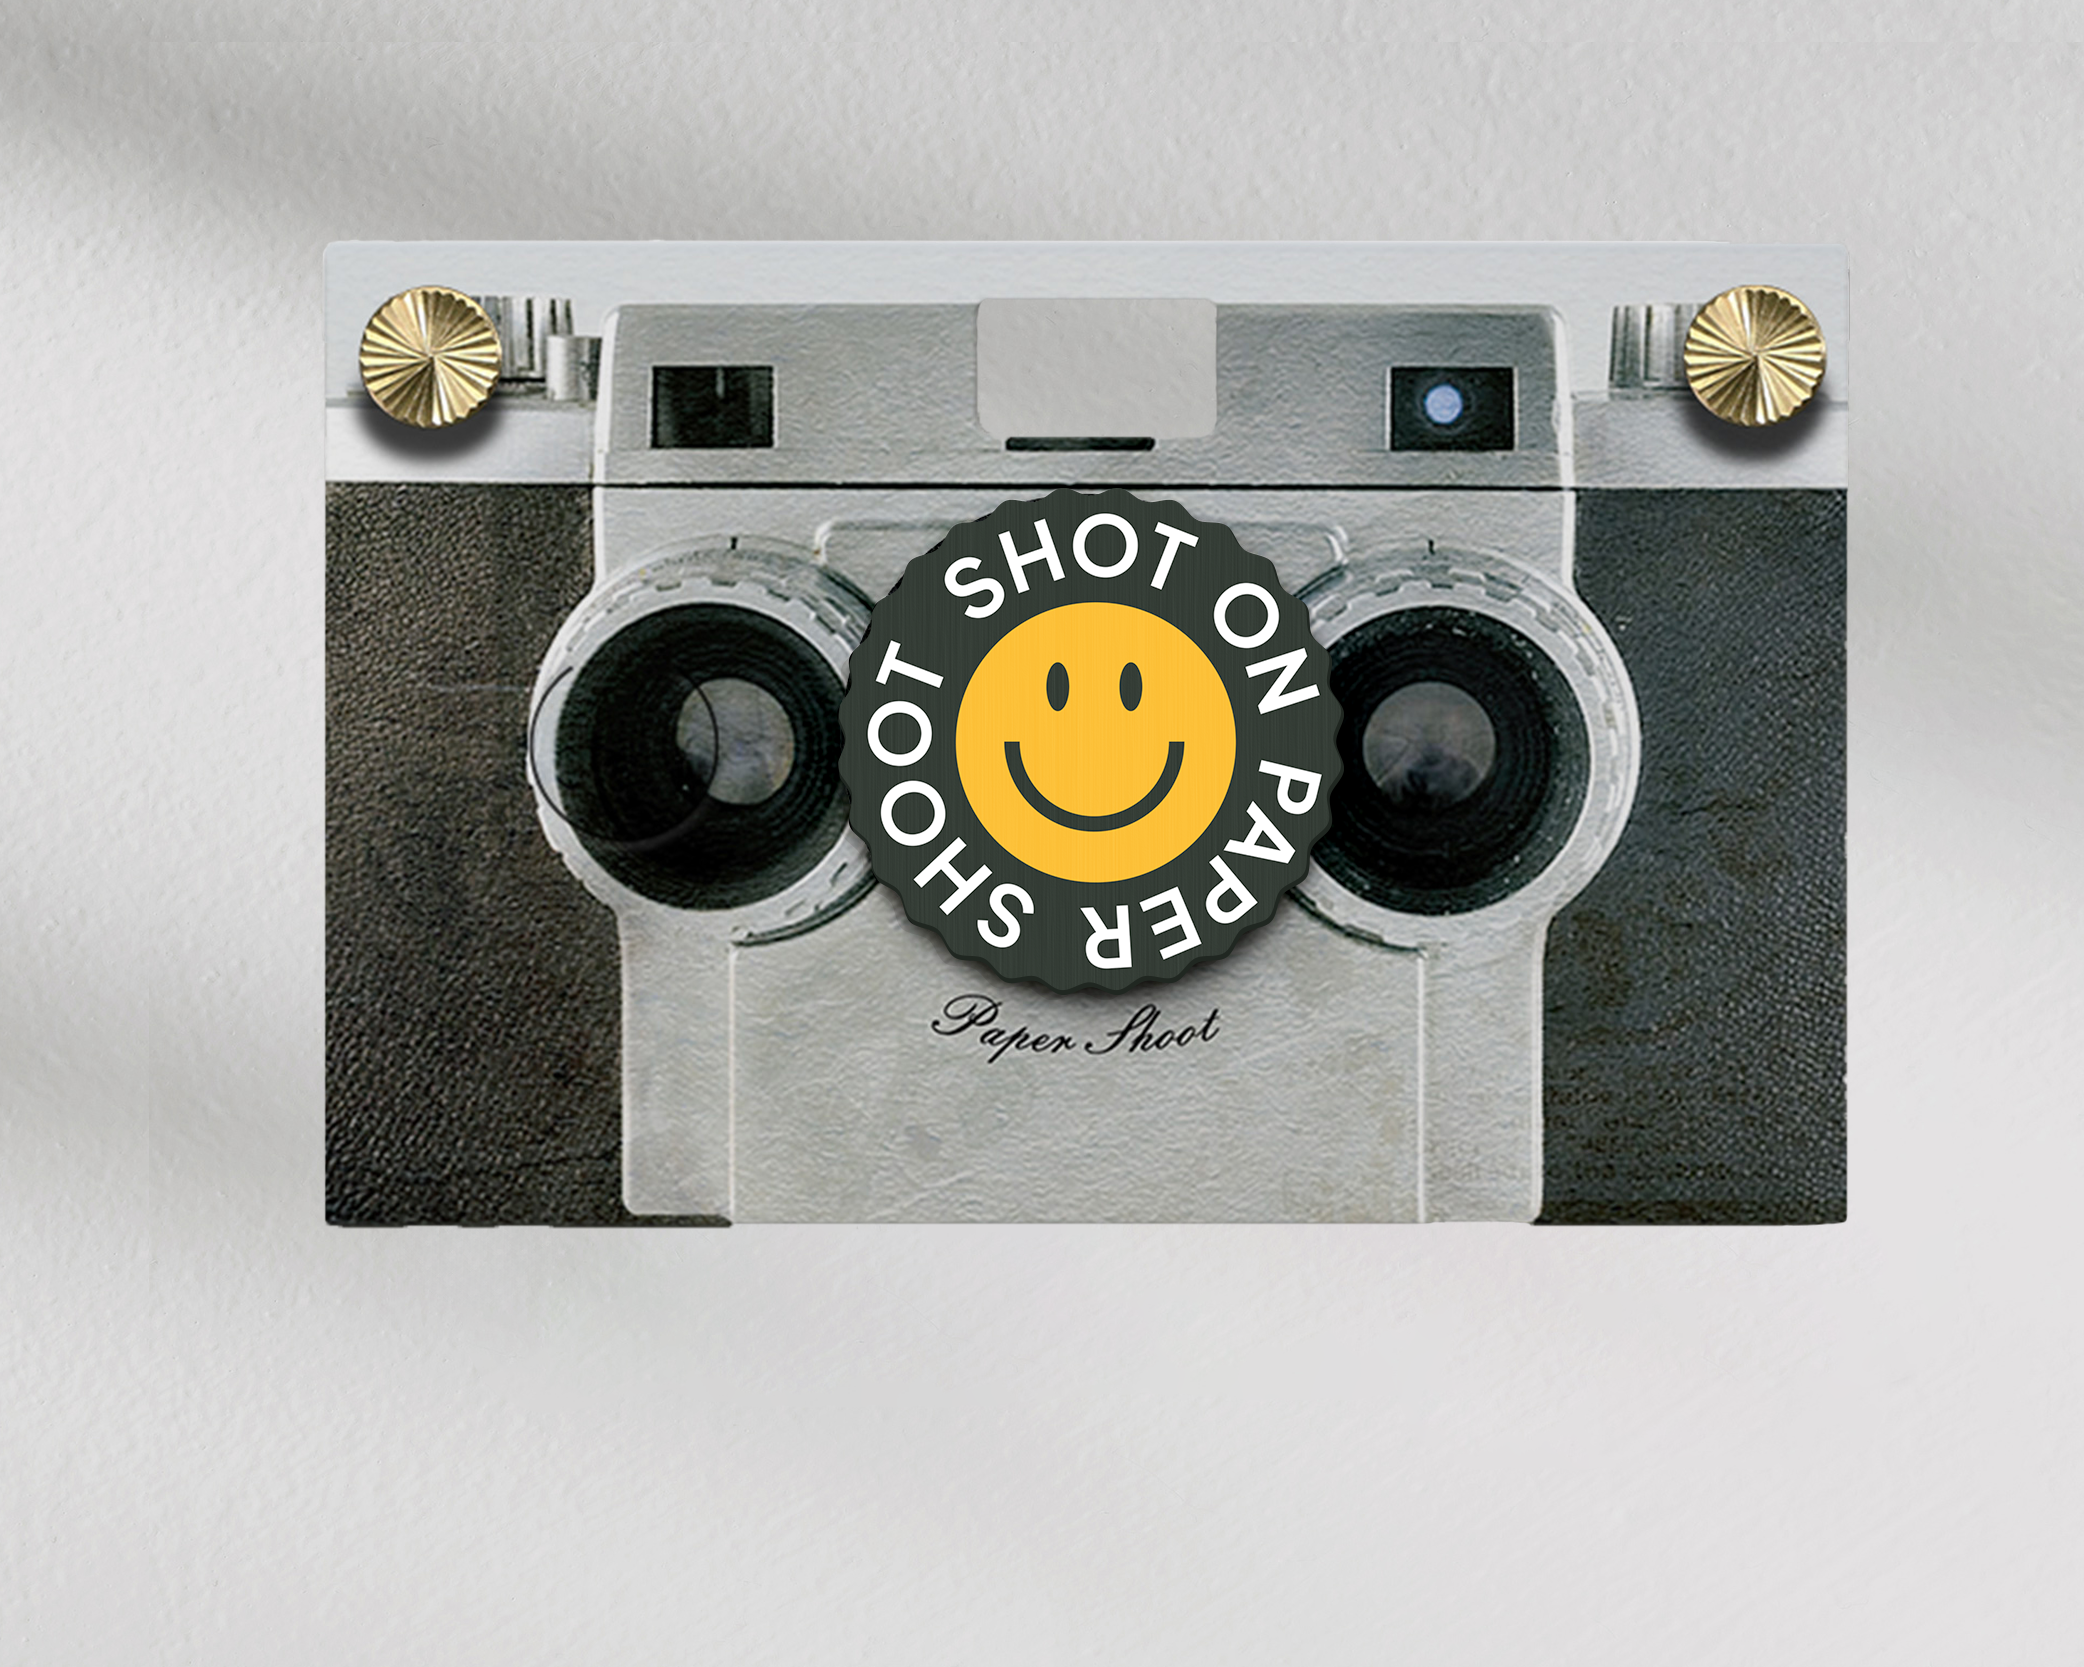 Shot on paper shoot text lens cover with yellow smiley face graphic with grip groves on a paper shoot camera 